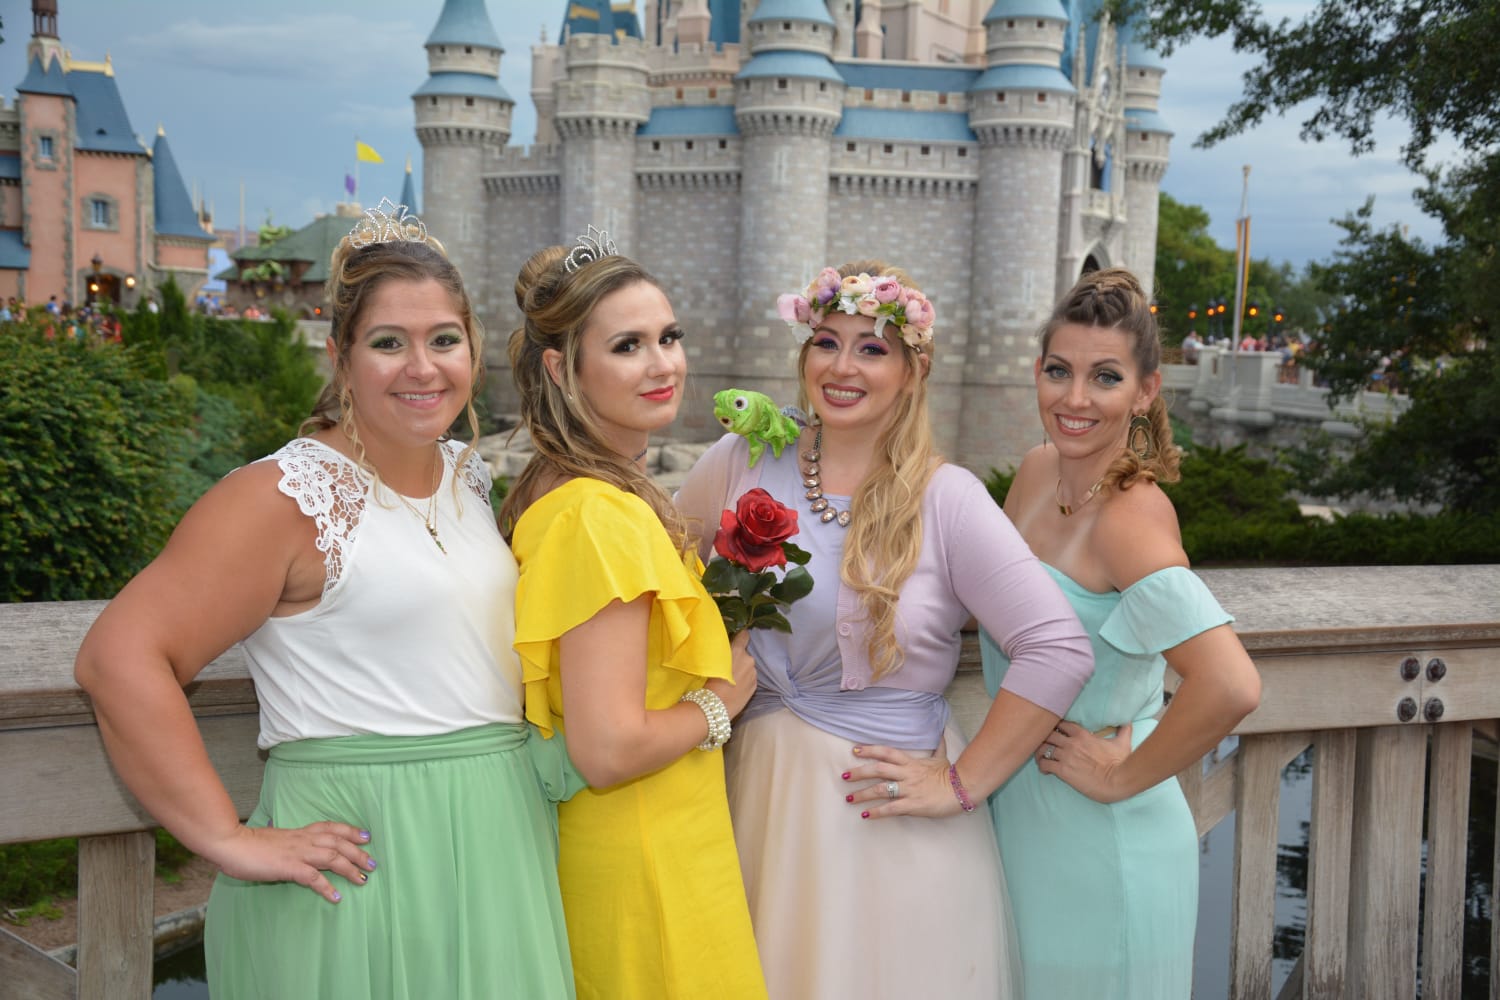 Disney World Offers Free Princess Makeovers to Adults